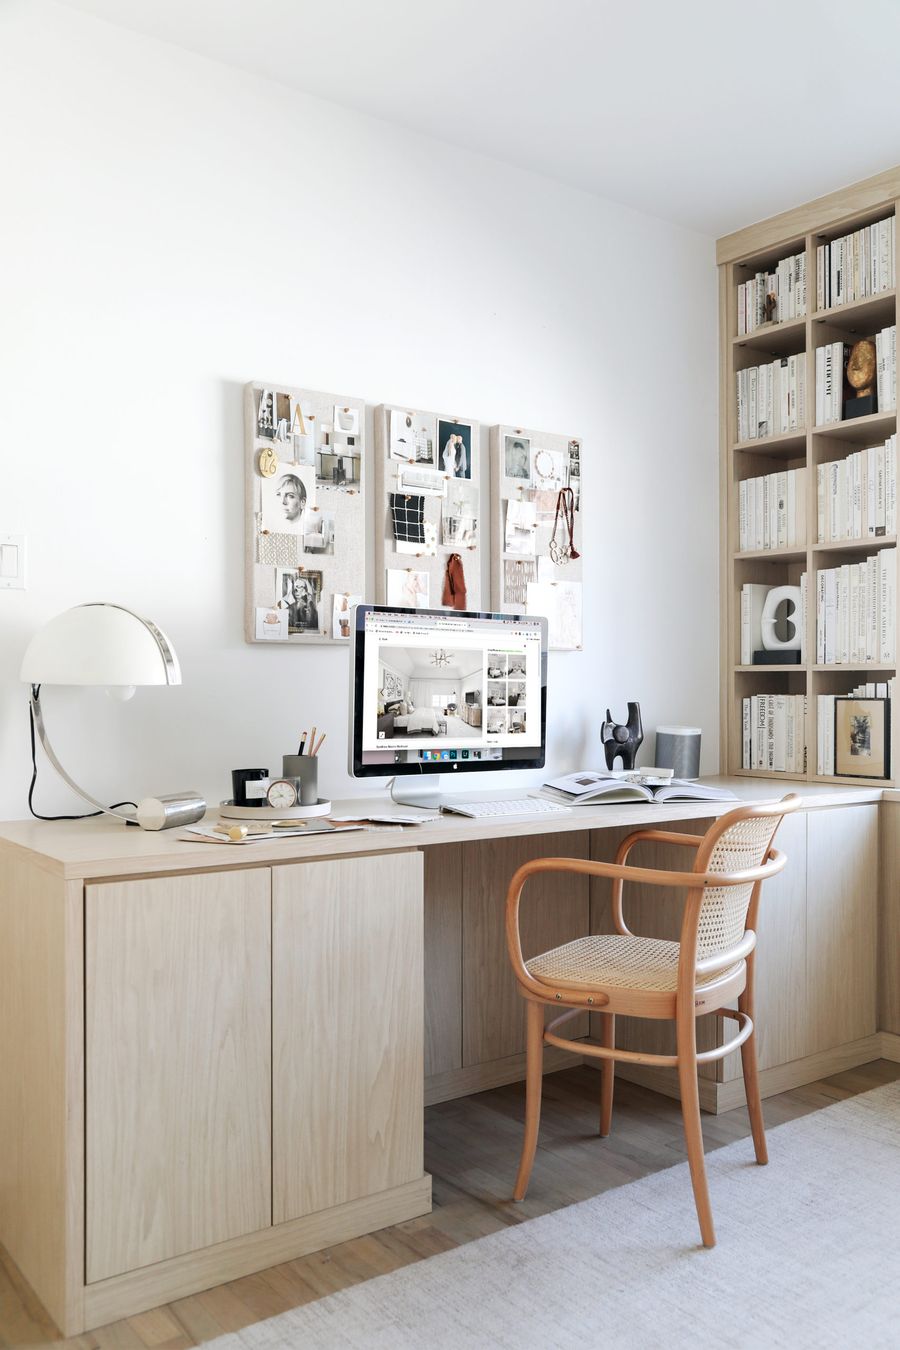 Cane office chair in Neutral home office decor via annesage